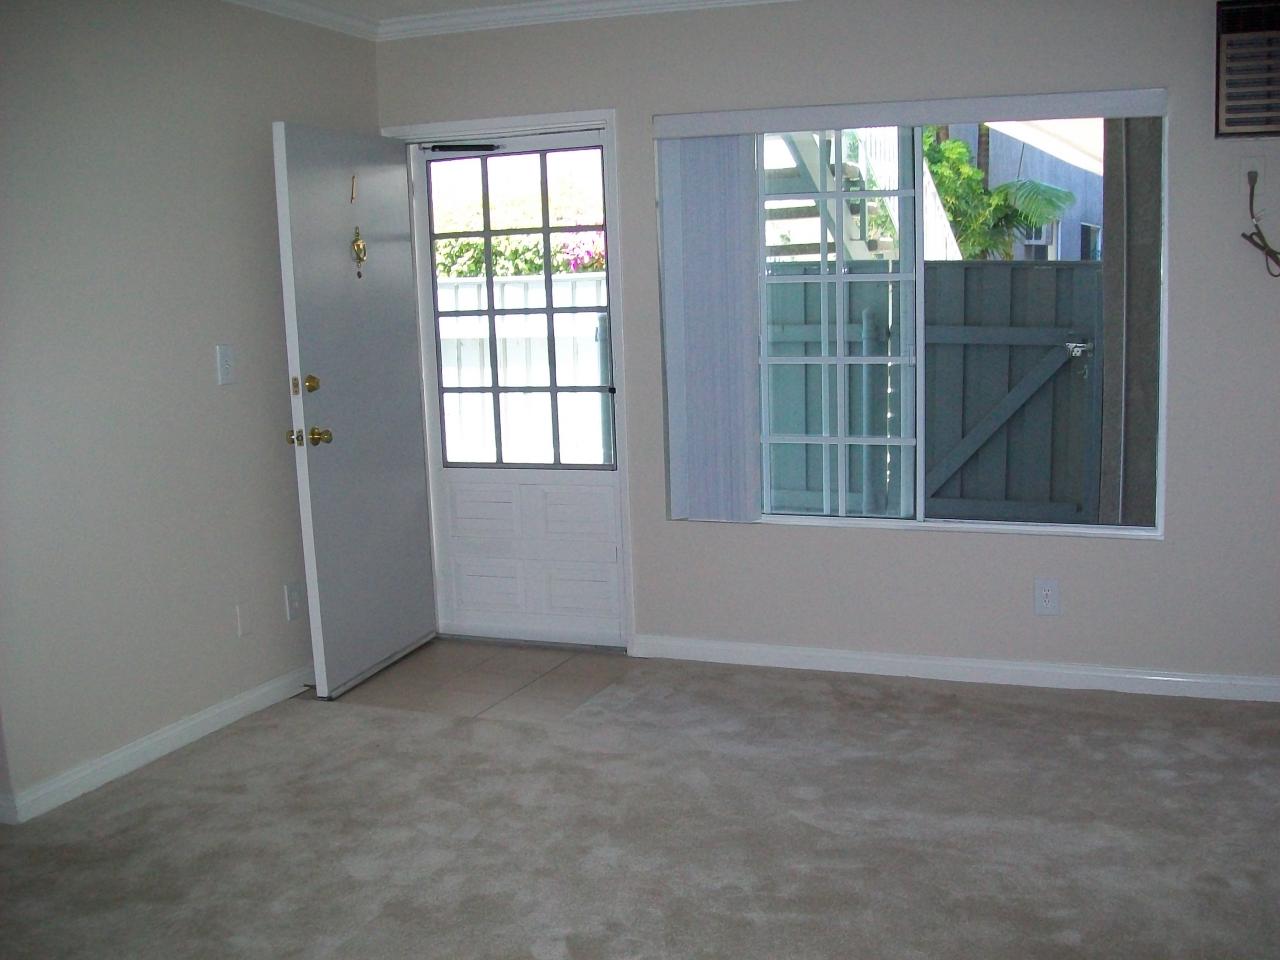 Photo of Kingsbury Villas Apartments - a view of an apartment interior living room with front door